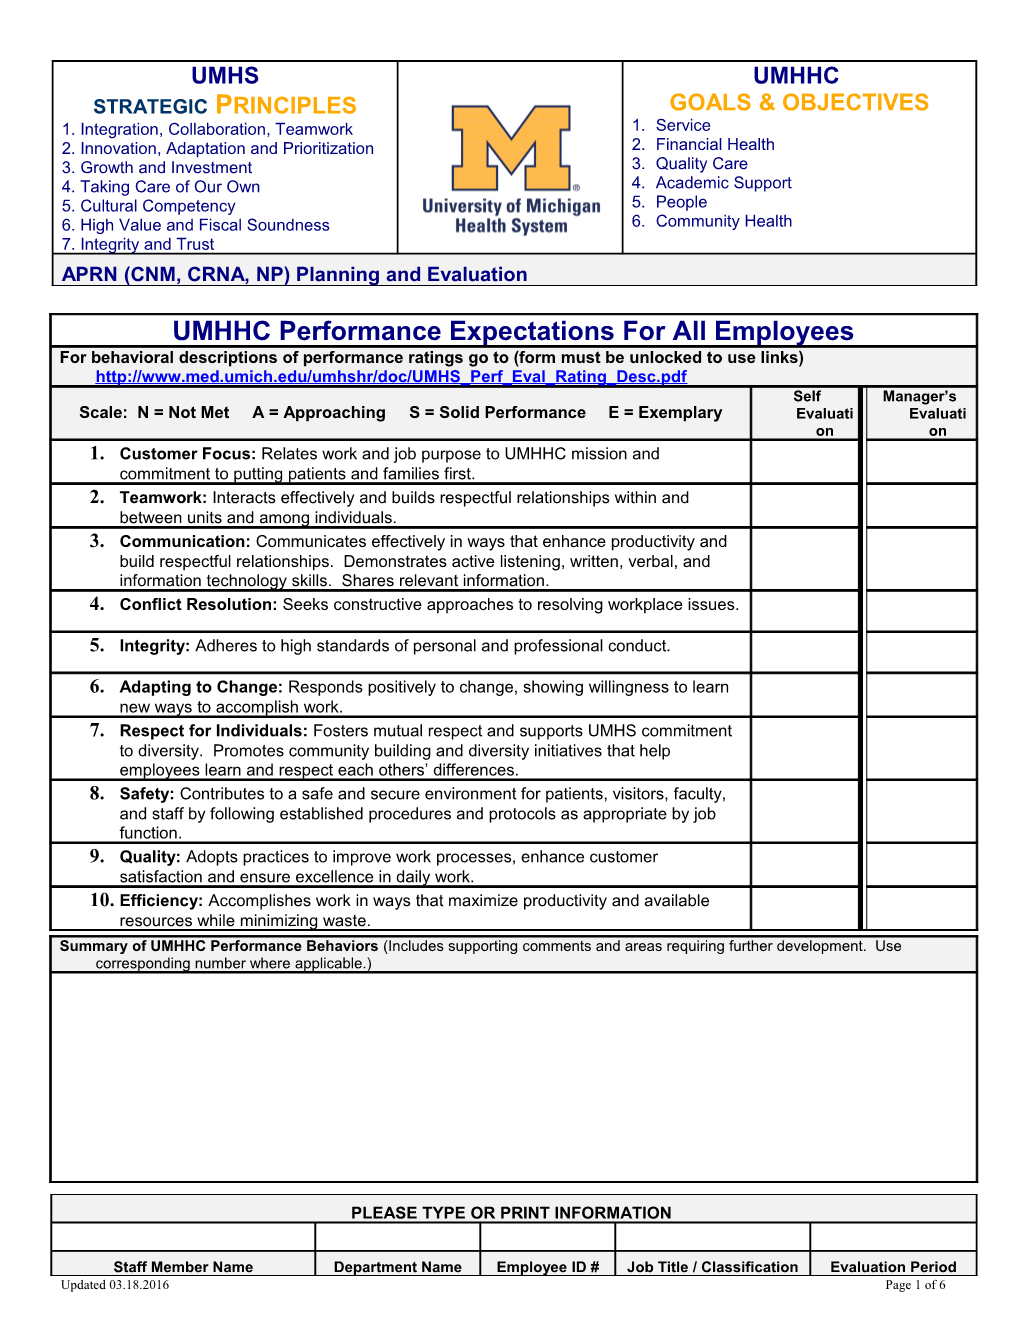 UMHS Performance Expecation